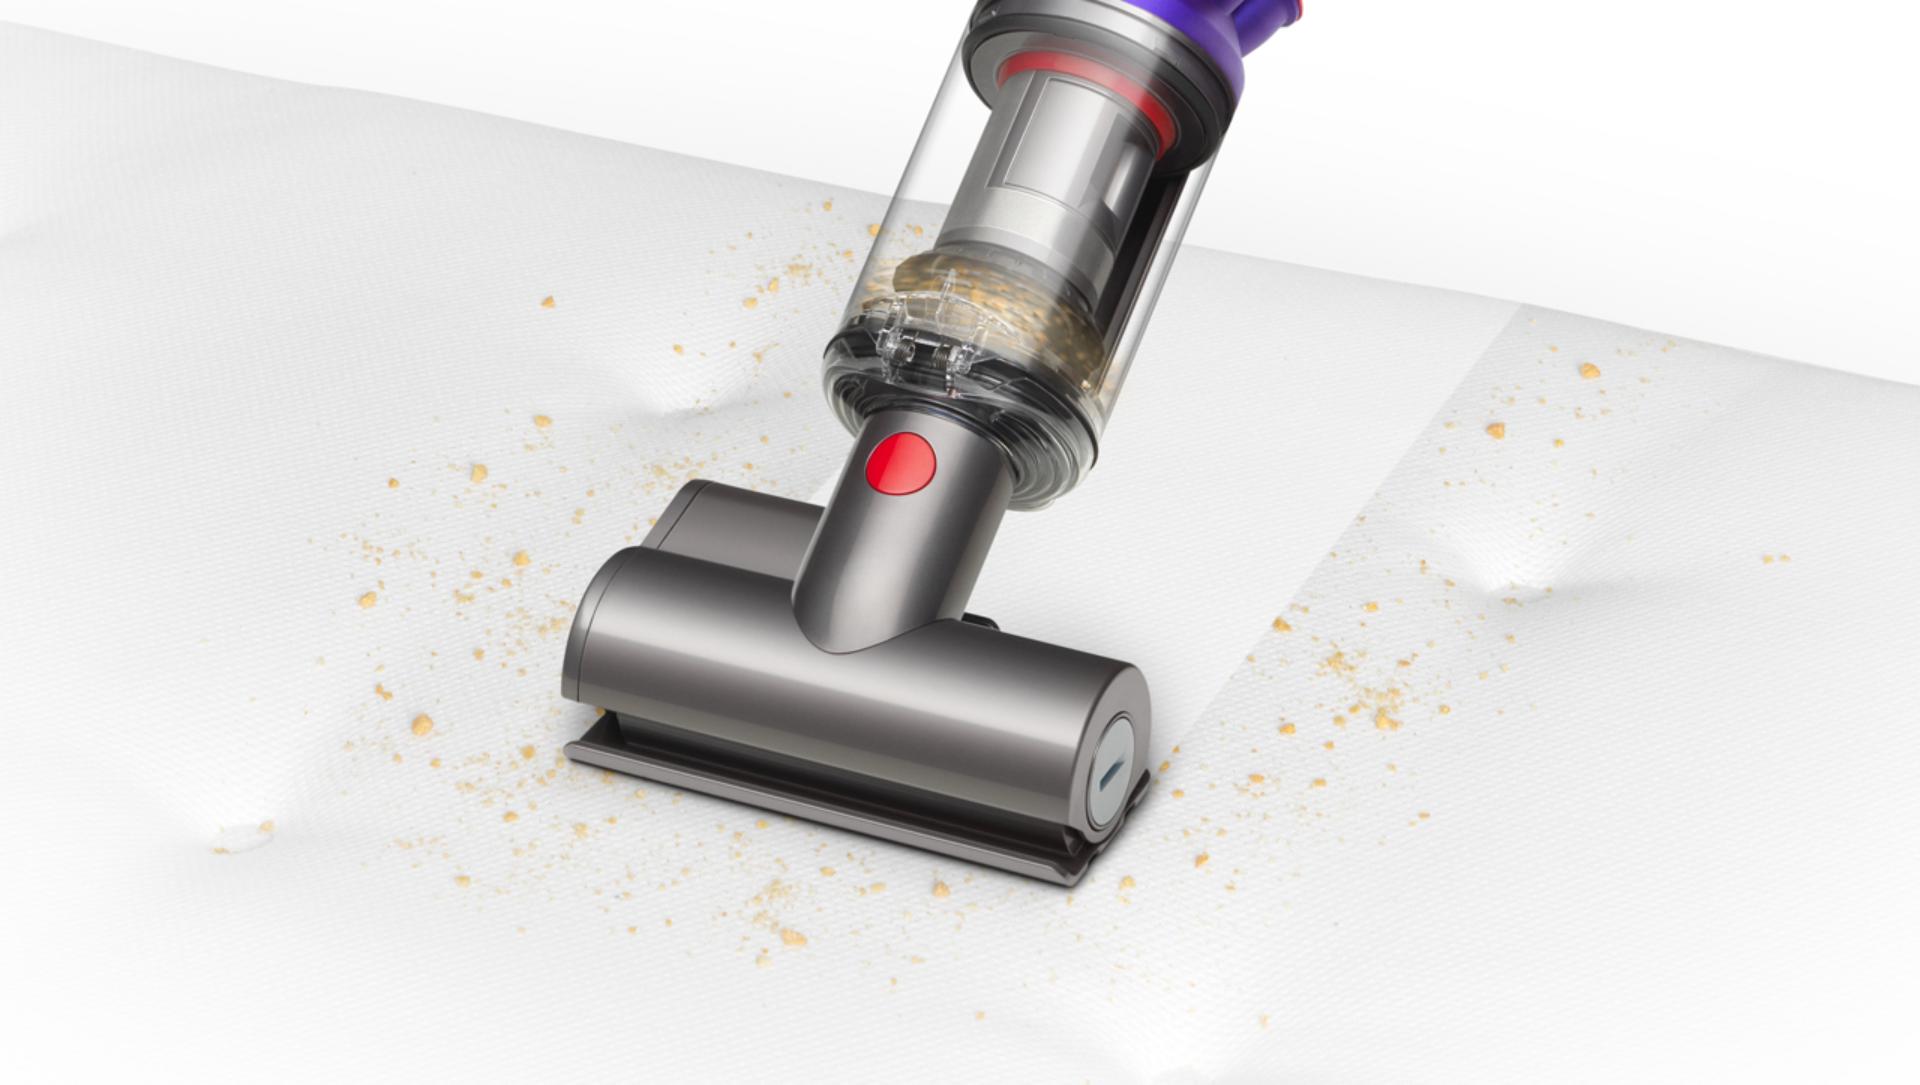 Mini motorised tool being used to clean a mattress.